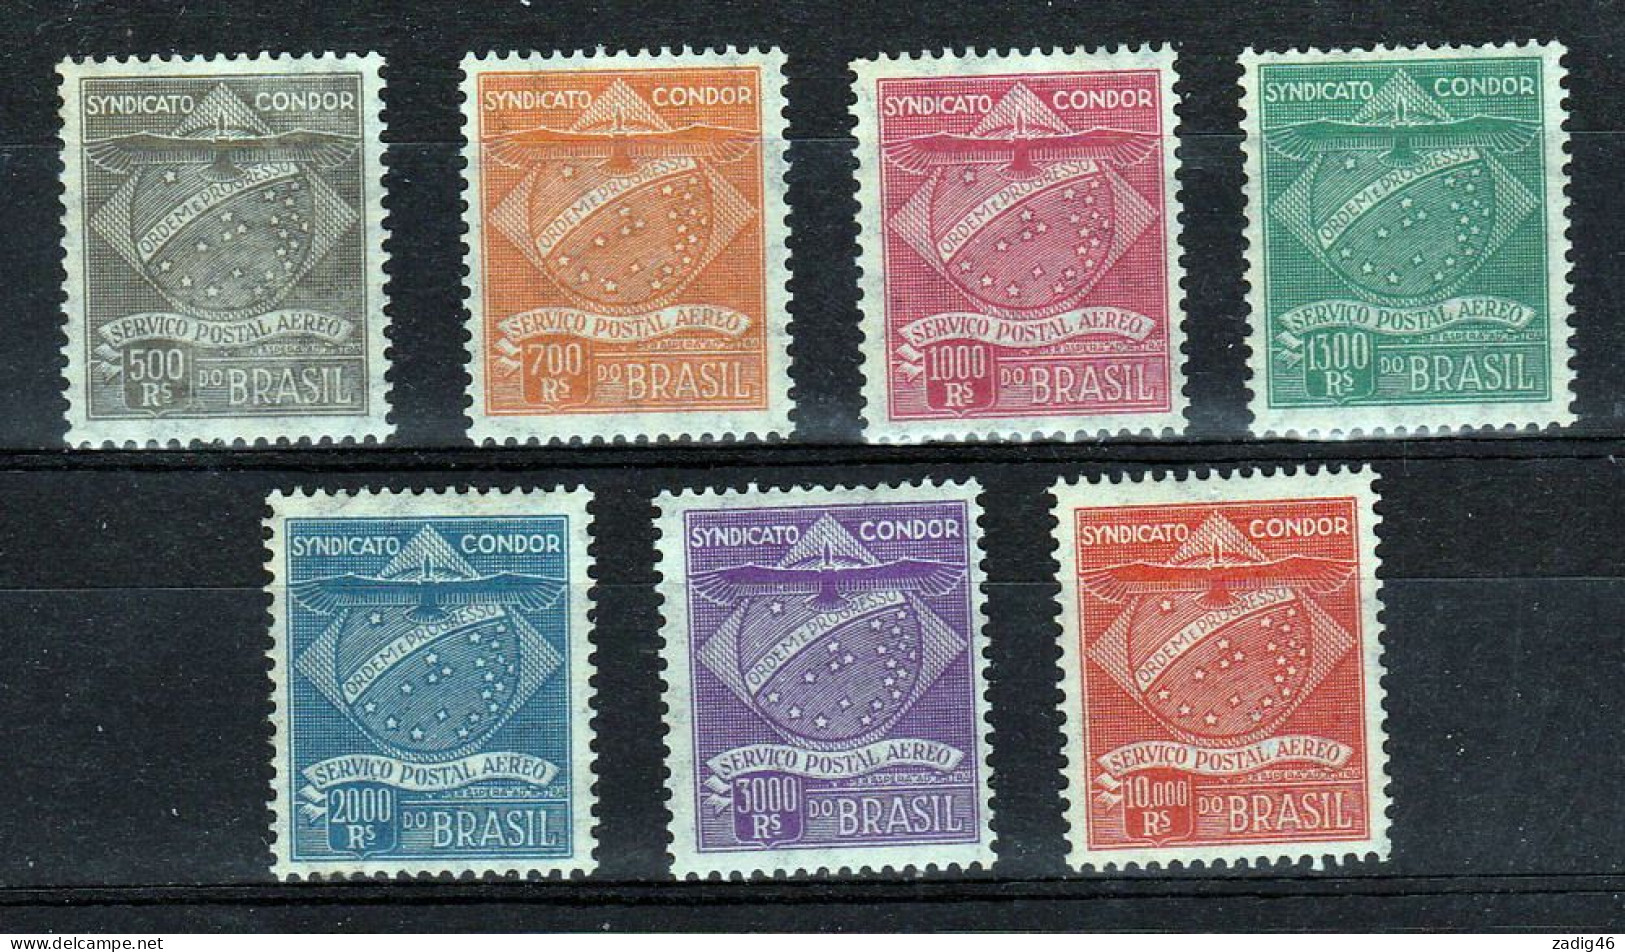 BRESIL - COMPAGNIE CONDOR - TIMBRES N° 1 A 7 - NEUFS AVEC INFIMES TRACES DE CHARNIERES A PEINE VISIBLES - Airmail (Private Companies)